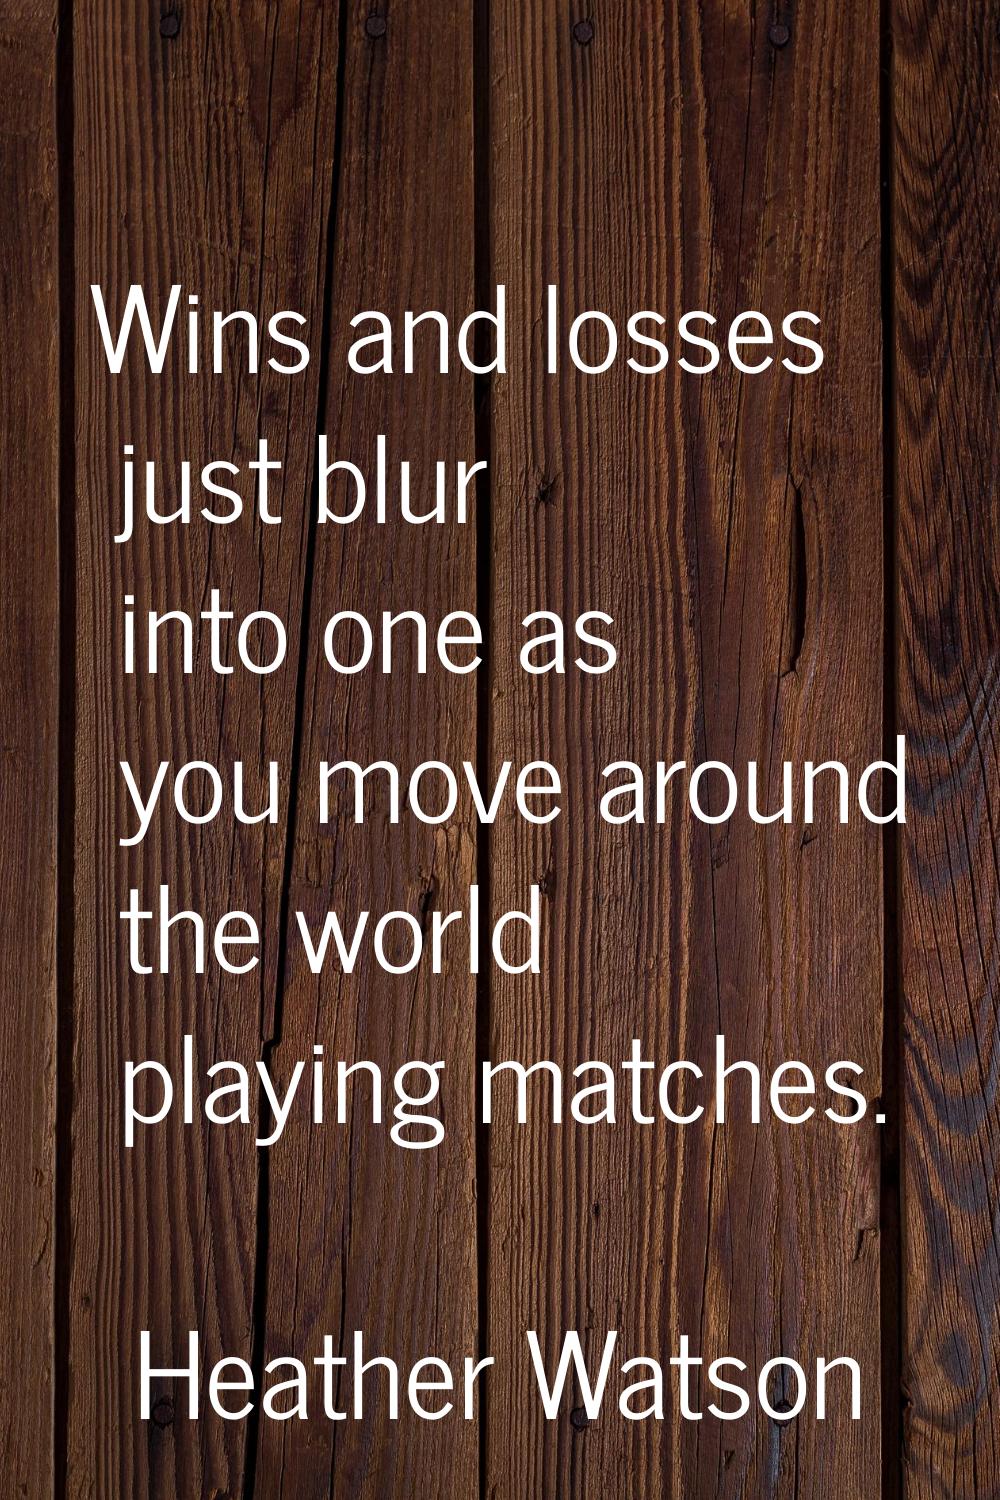 Wins and losses just blur into one as you move around the world playing matches.